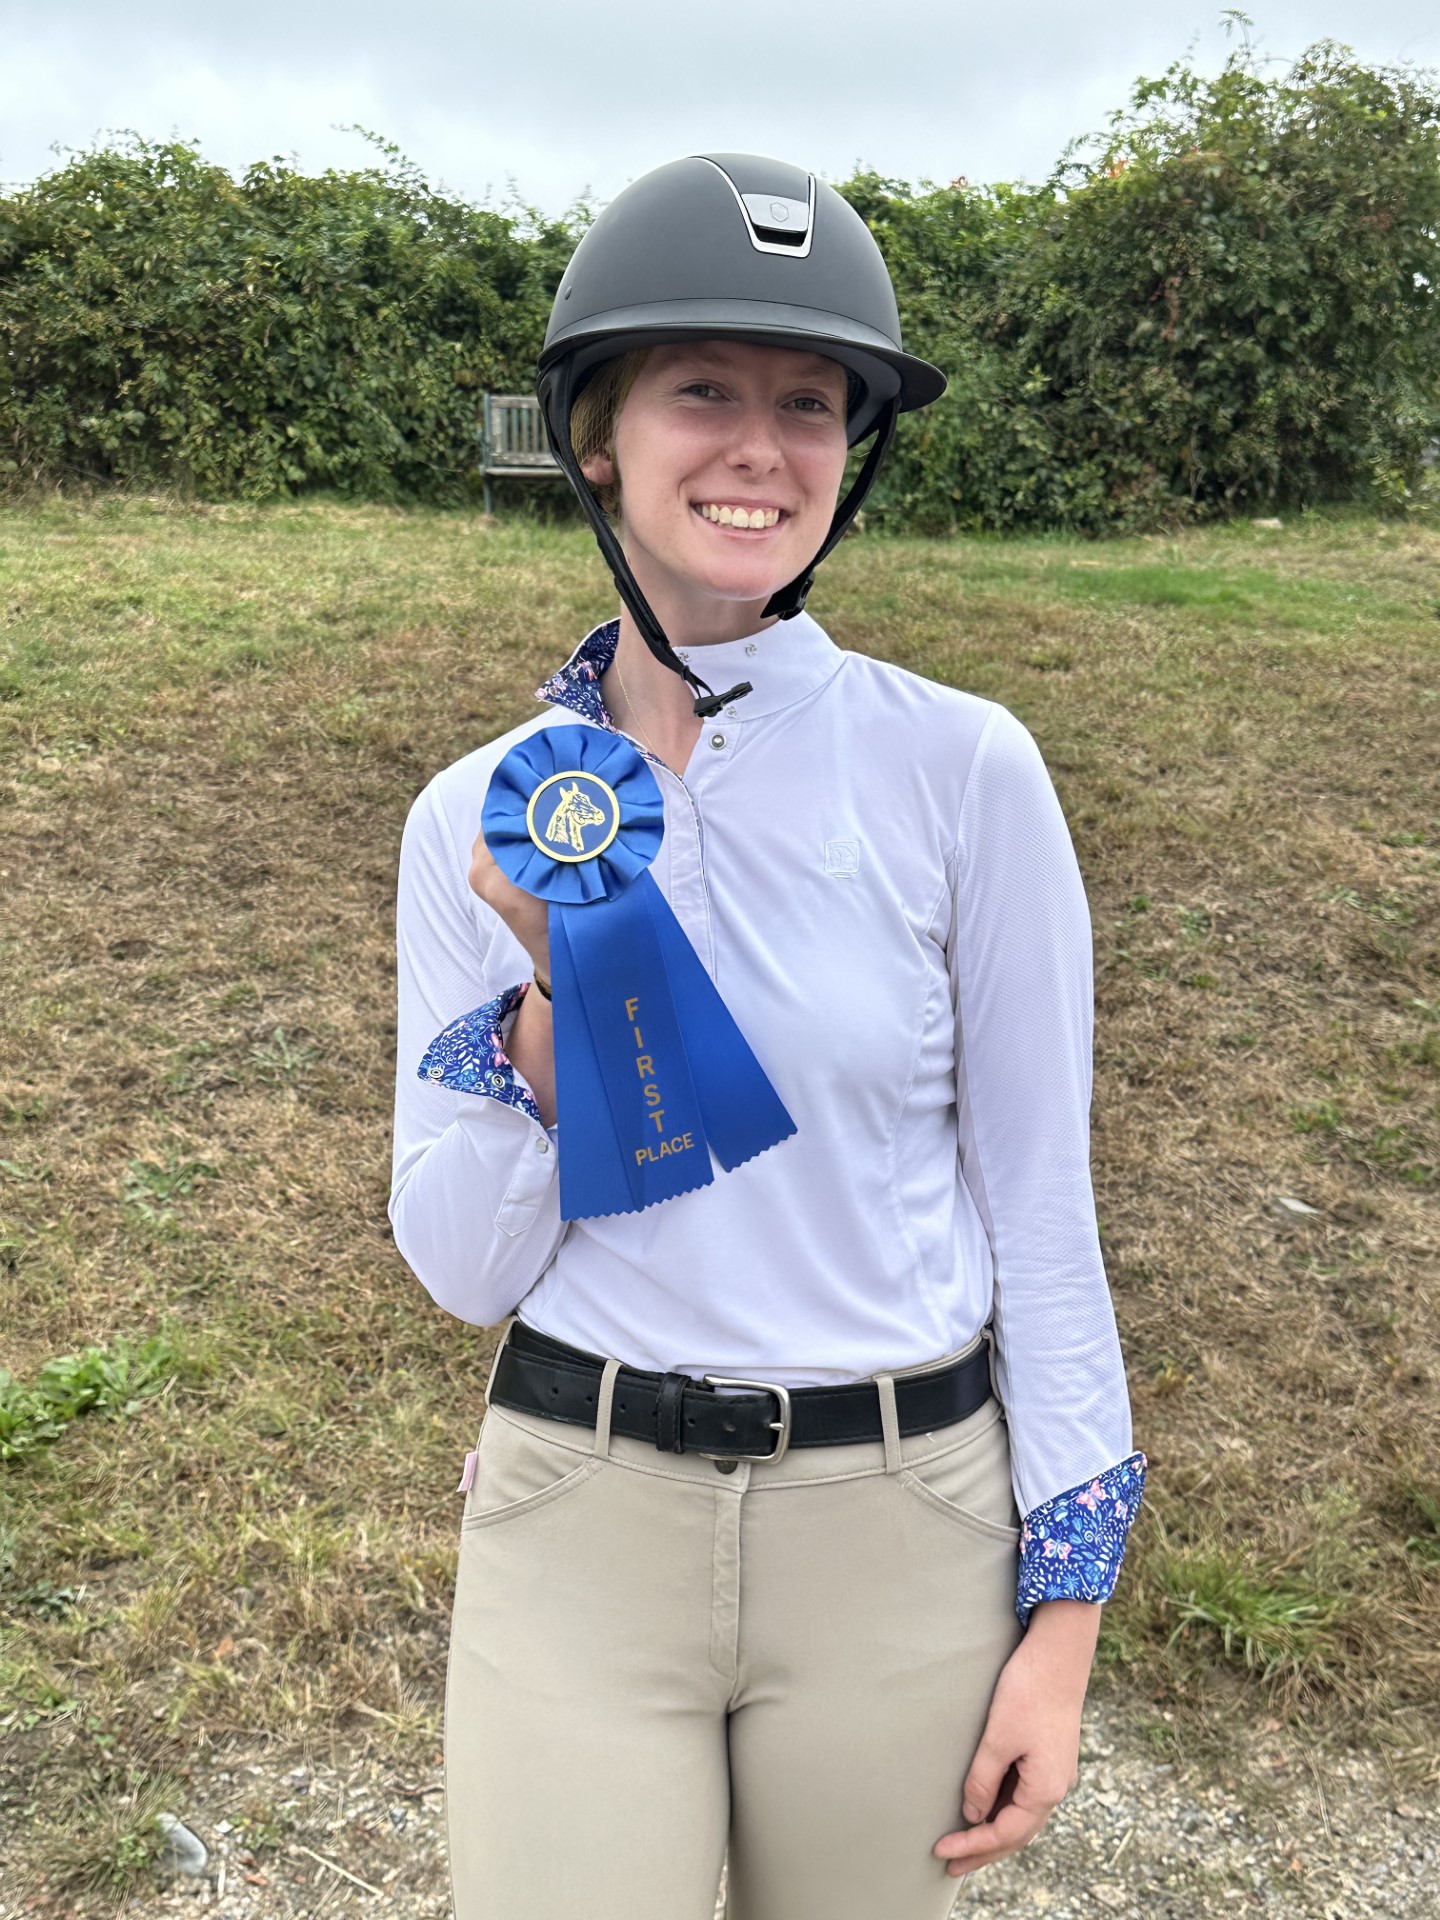 Emme Cox with her blue ribbon on Limit flat